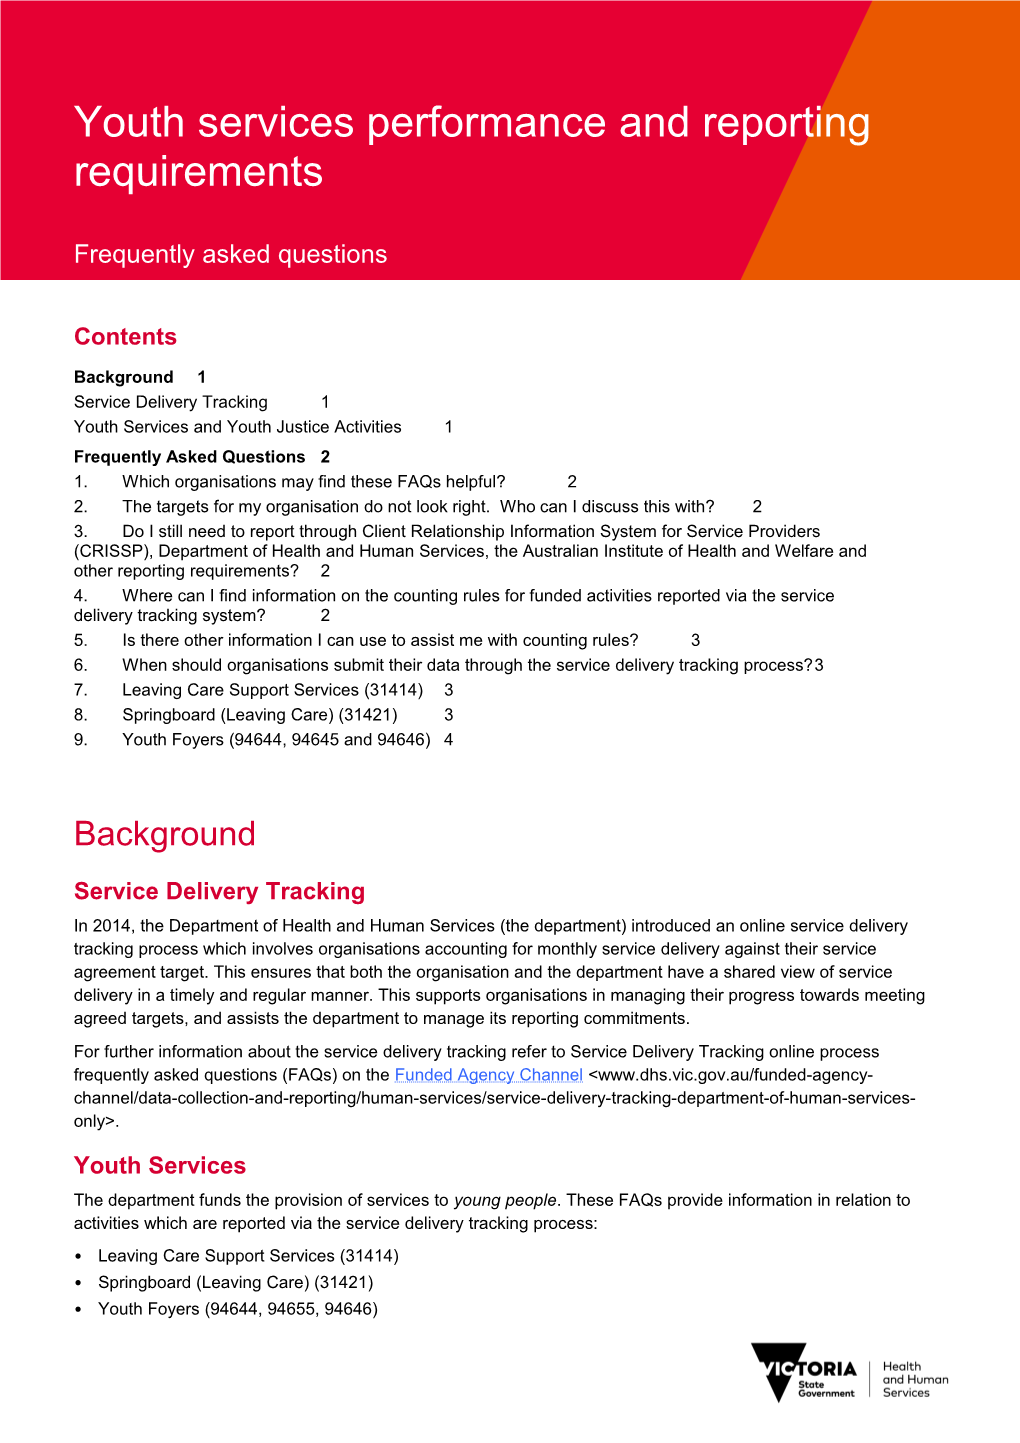 Youth Services and Youth Justice Performance and Reporting Requirements Frequently Asked